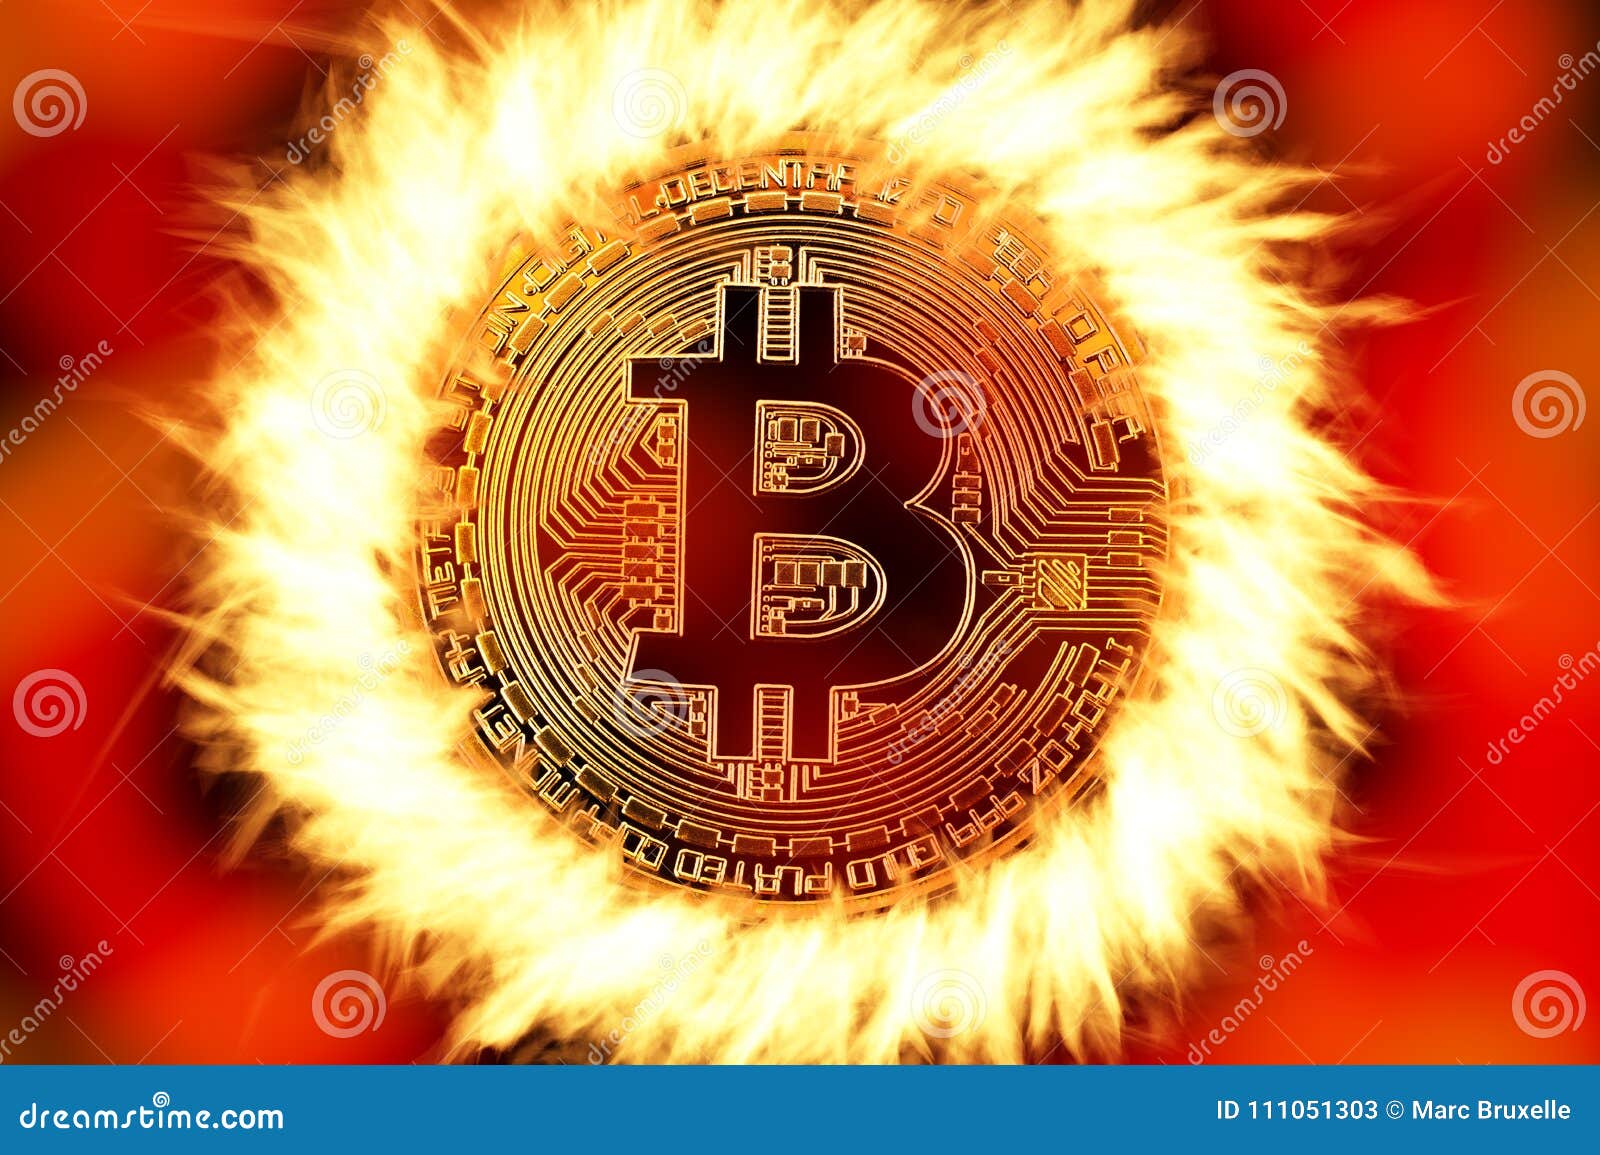 fire crypto currency